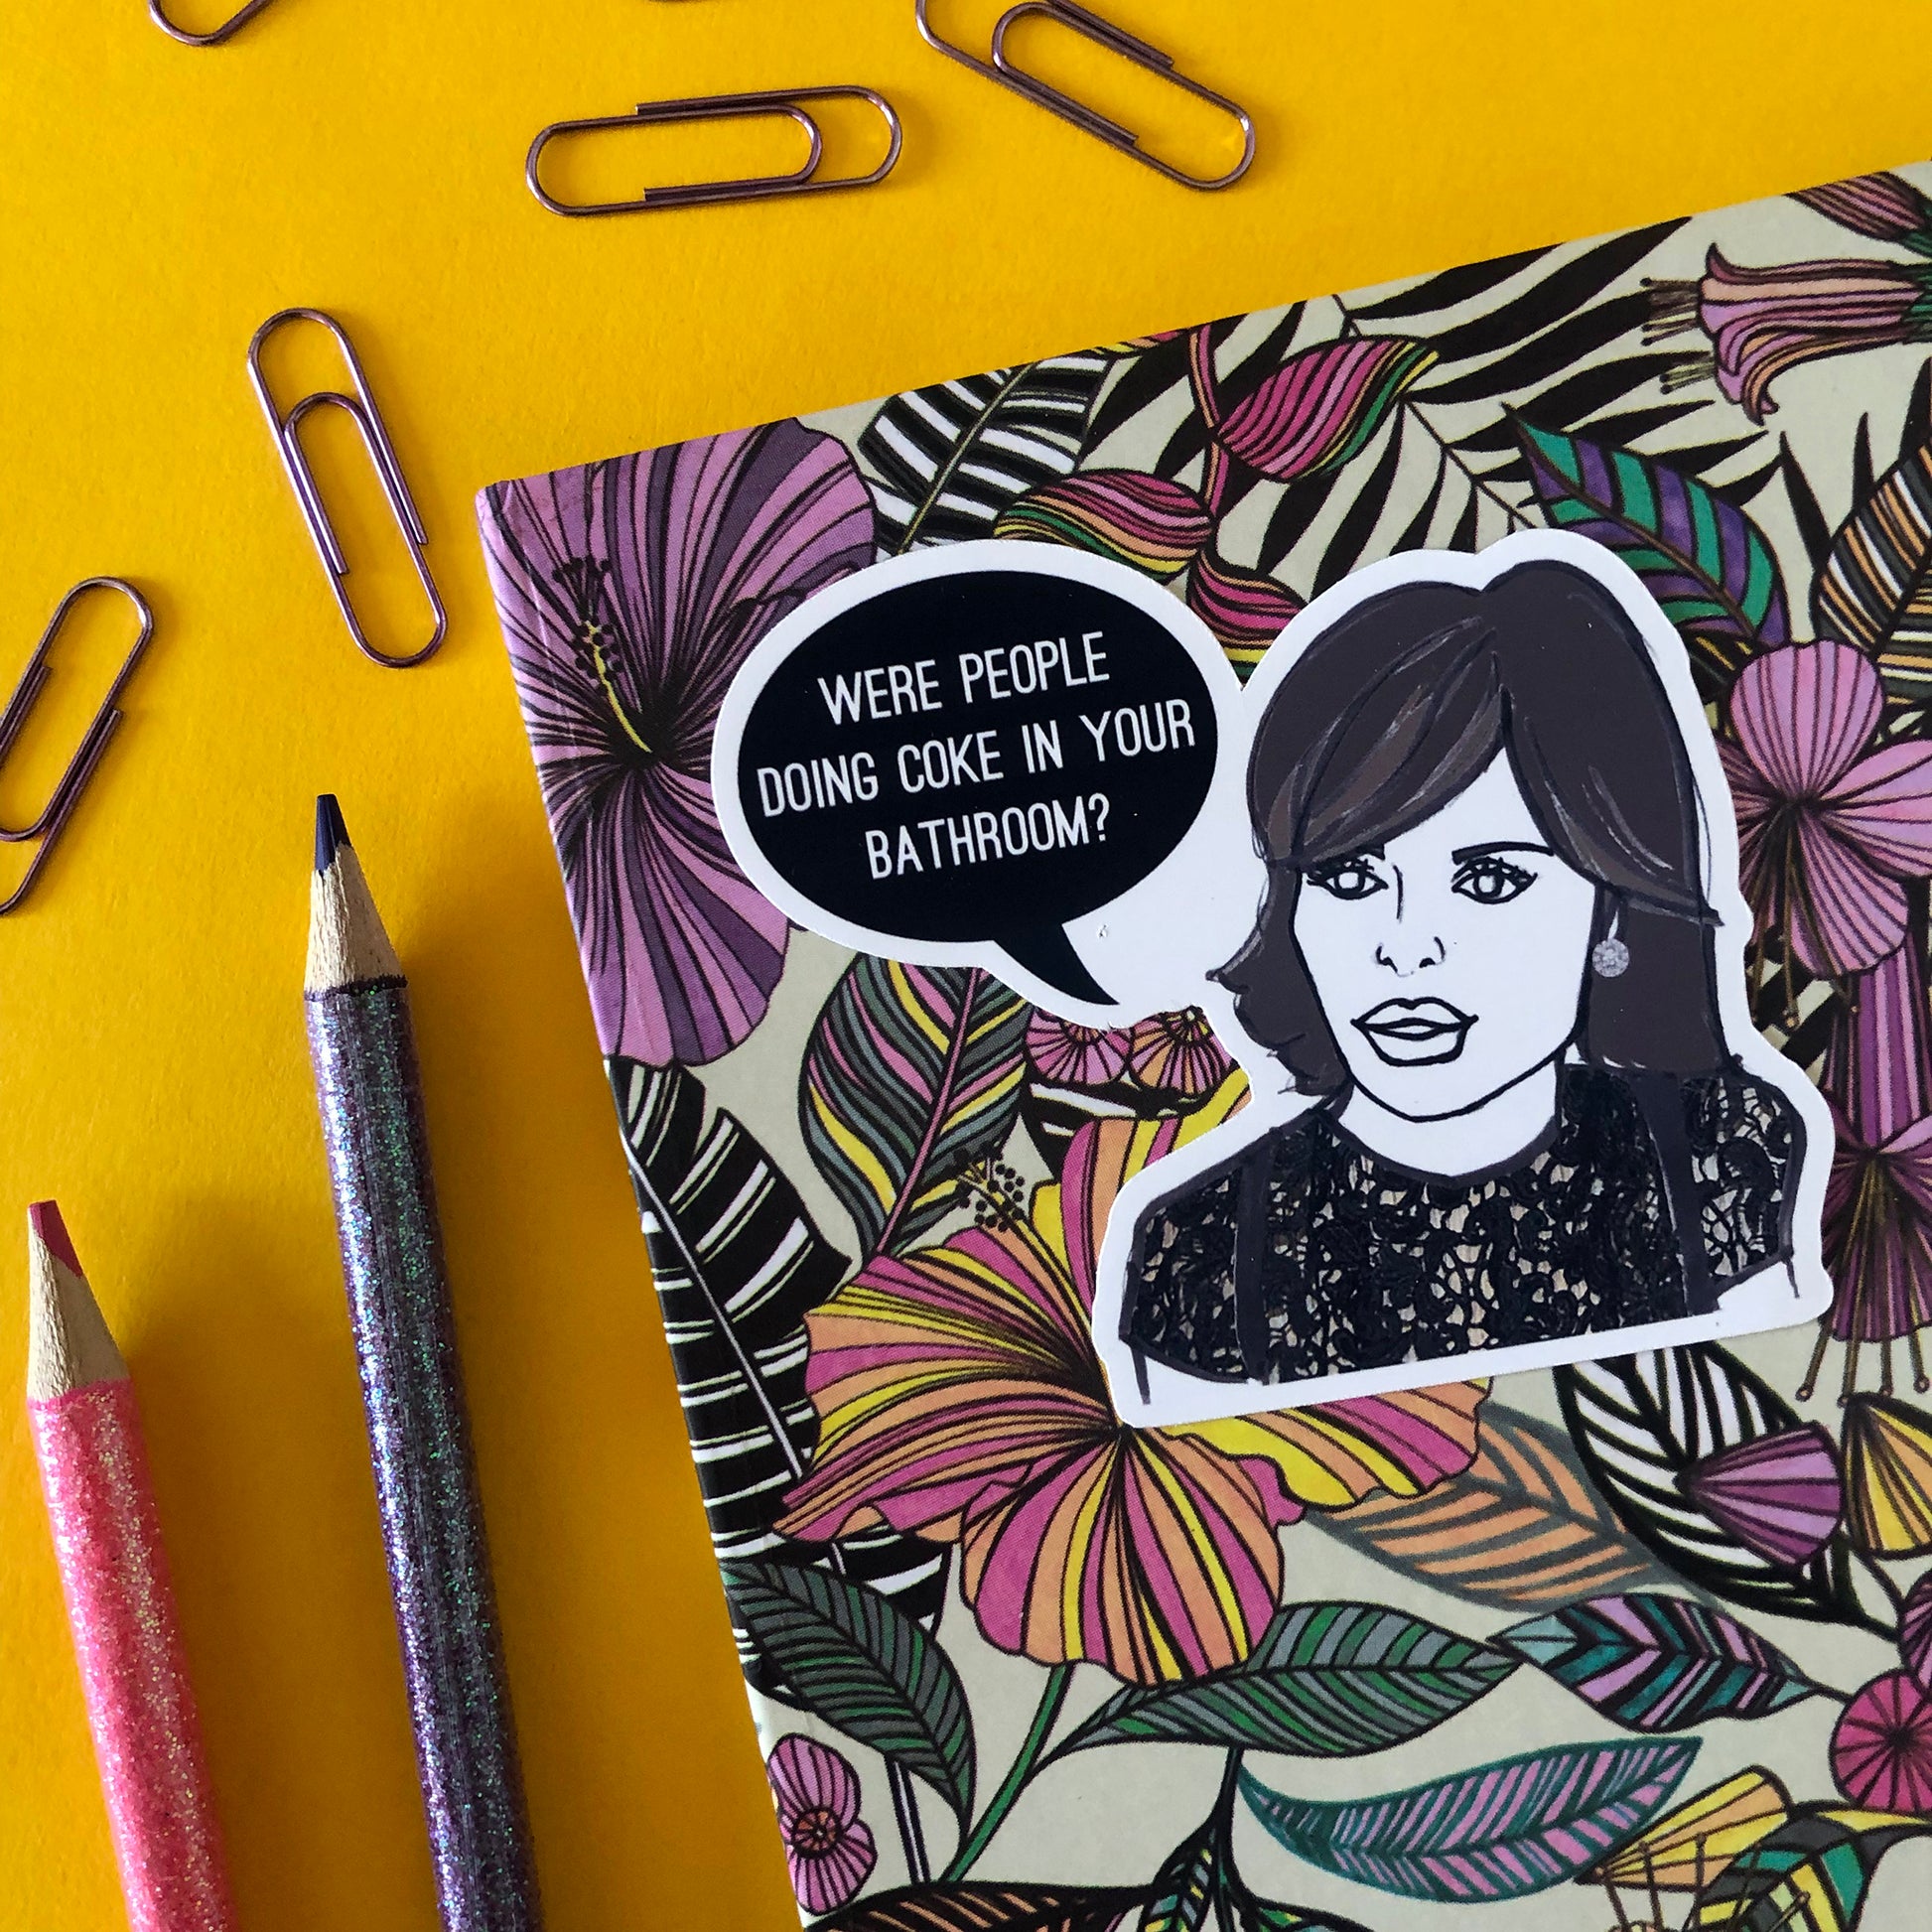 Image shows a single sticker from fun set inspired by some of the former real housewives of Beverly Hills and their most dramatic quotes